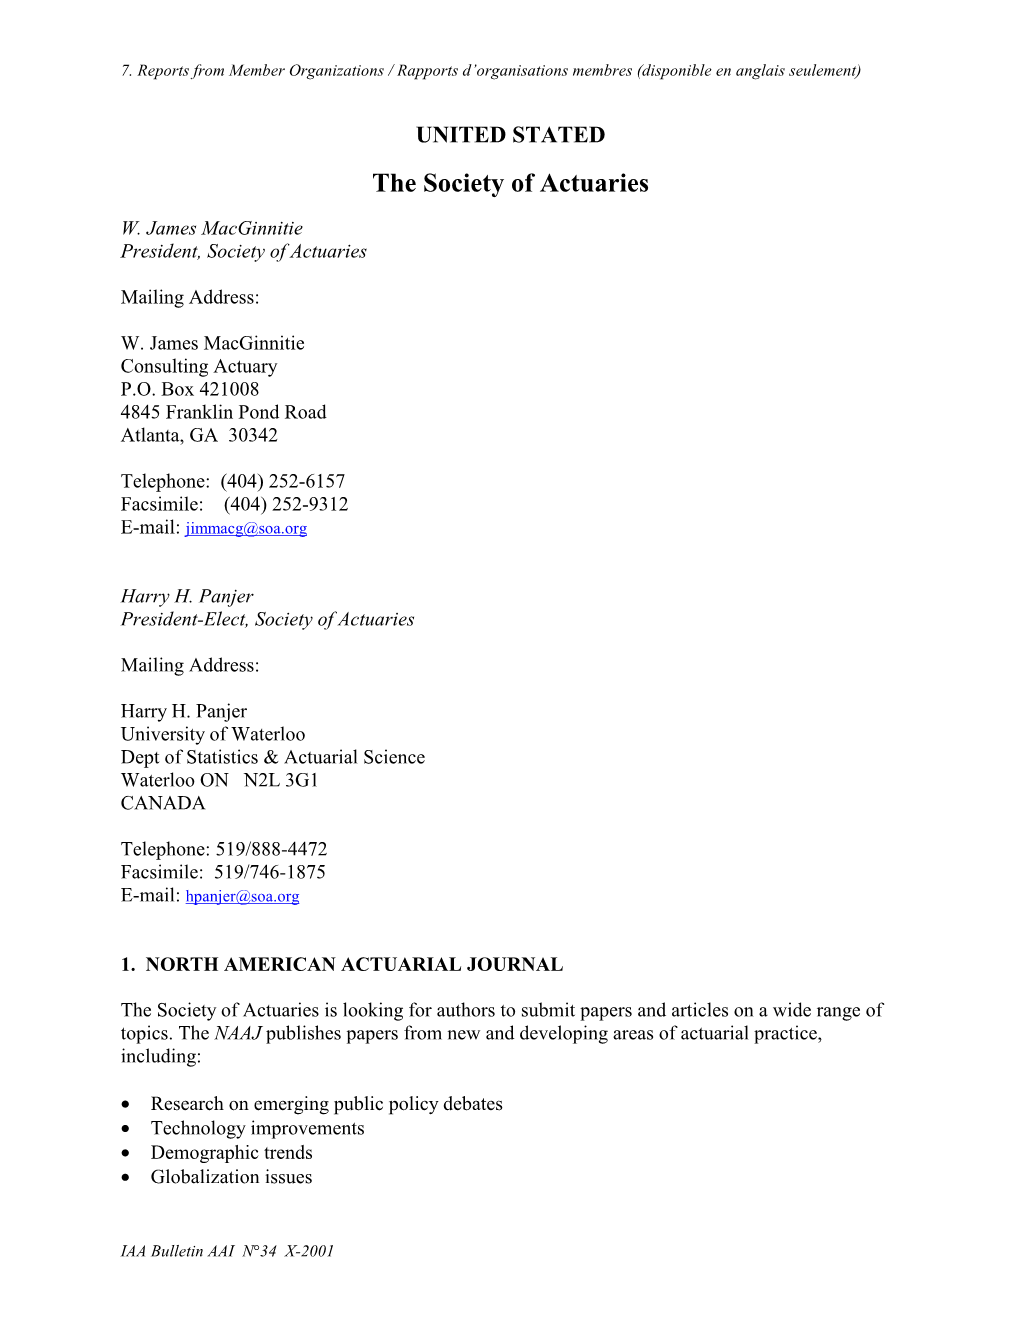 The Society of Actuaries